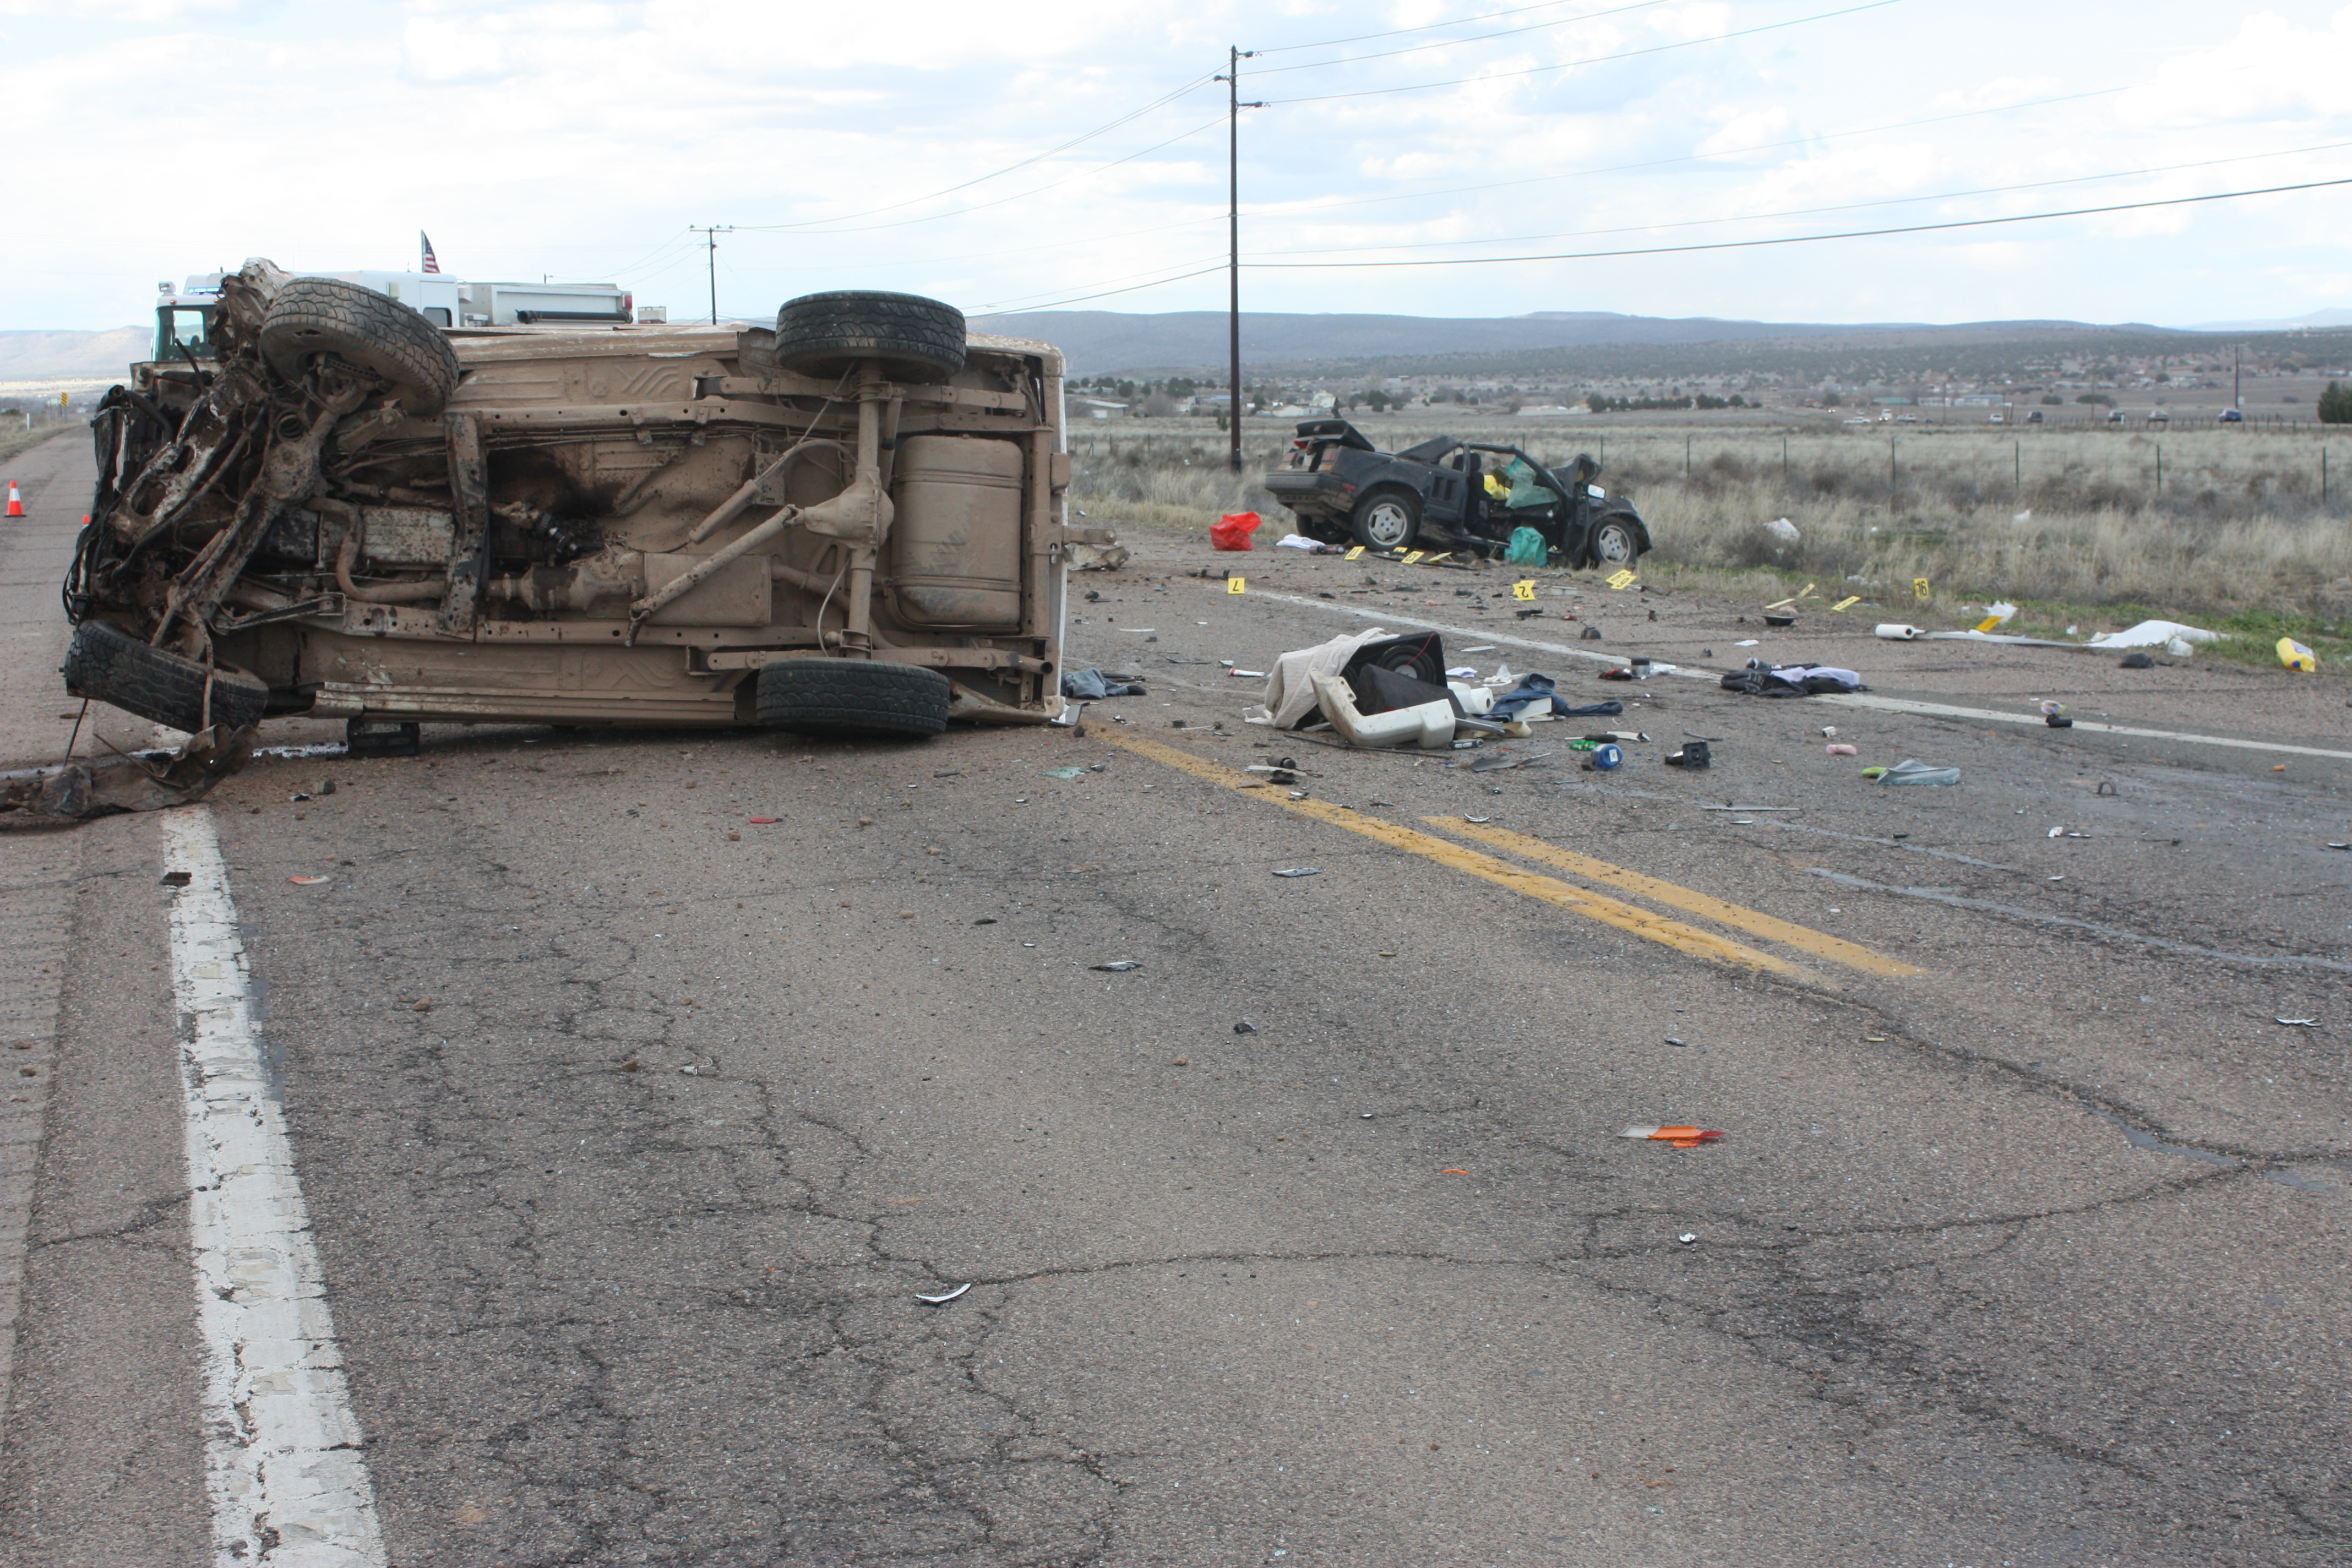 Update Second person dies in hospital after Highway 89 crash